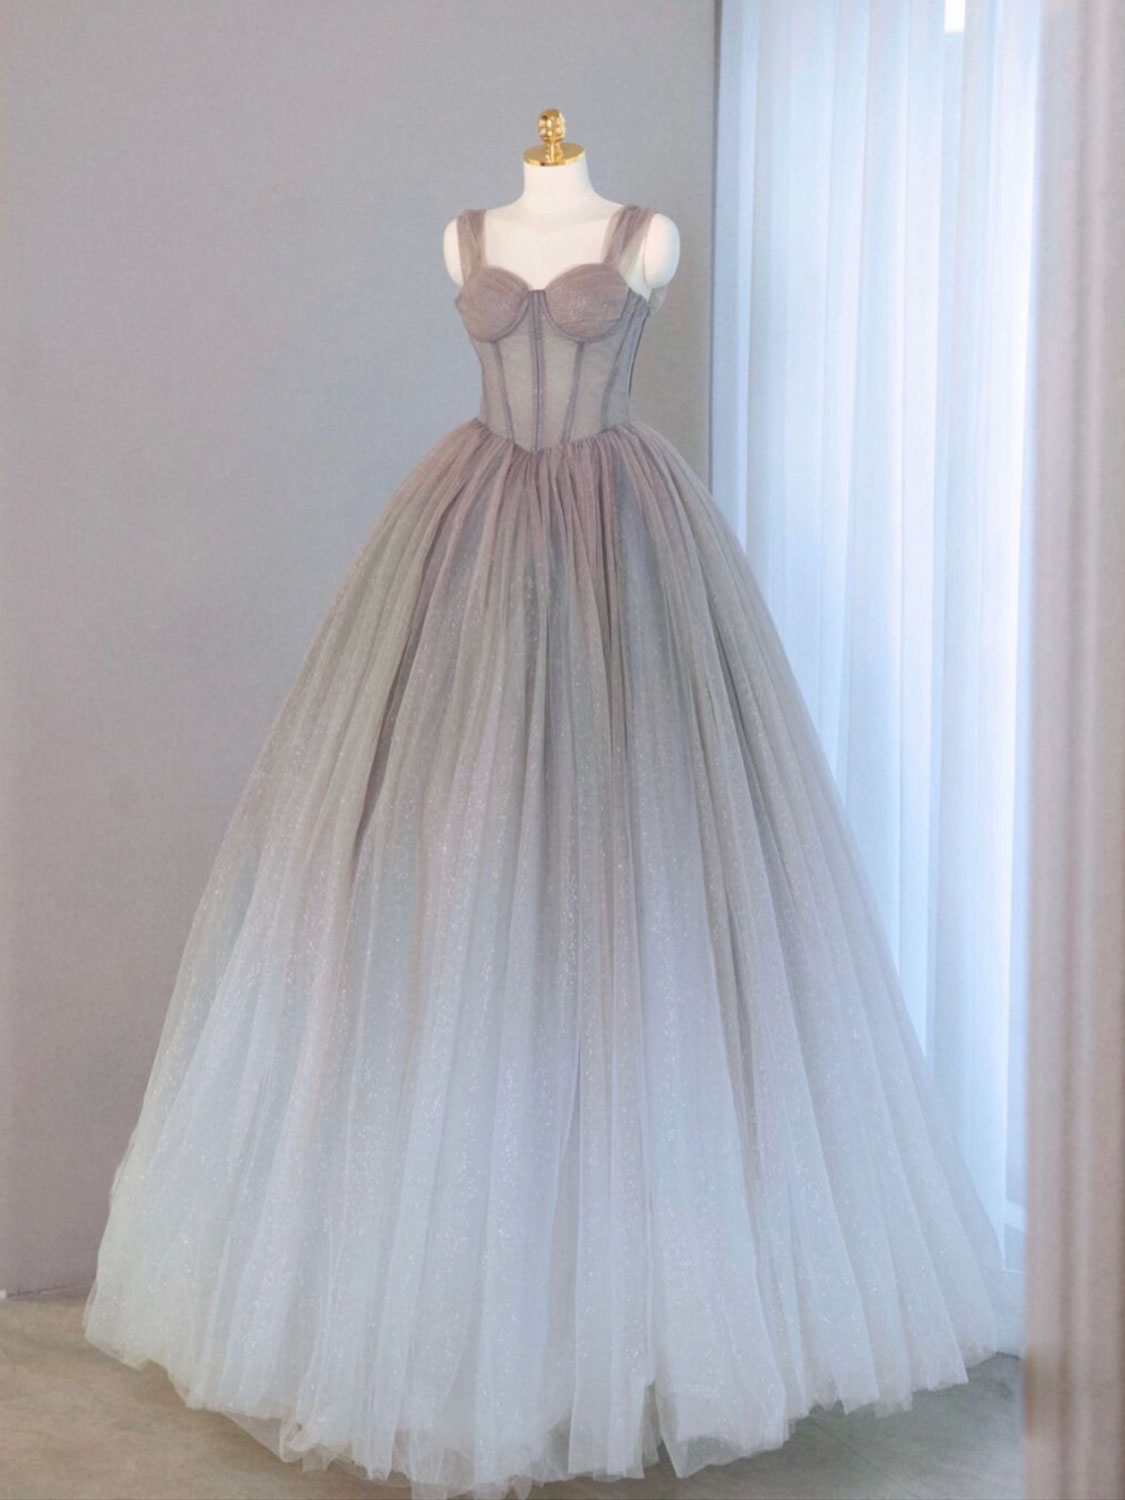 Ombre Grey Tull Sheer Ball Gown Corset Prom Dress - DollyGown